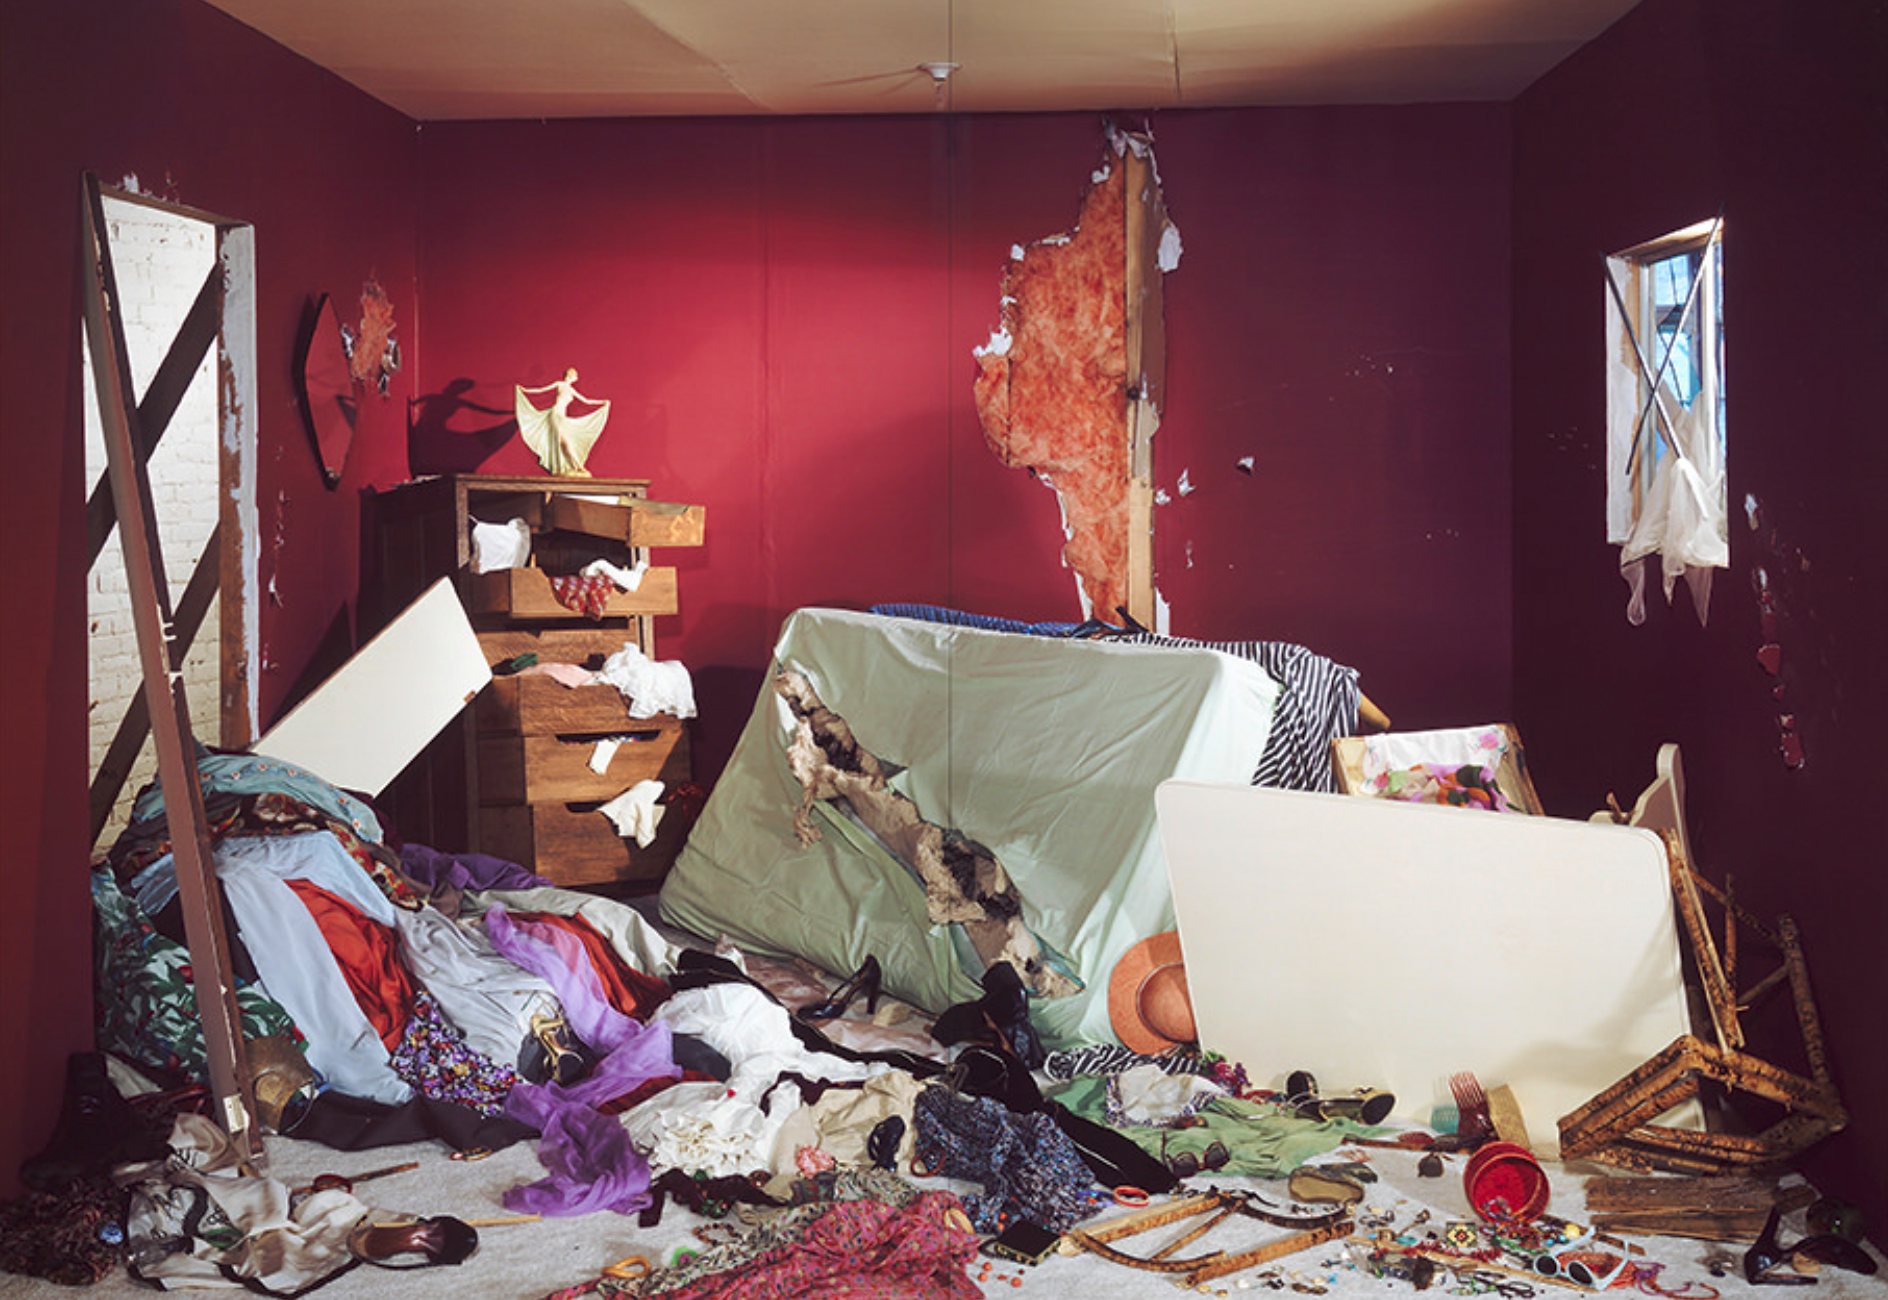 "The Destroyed Room, 1978”